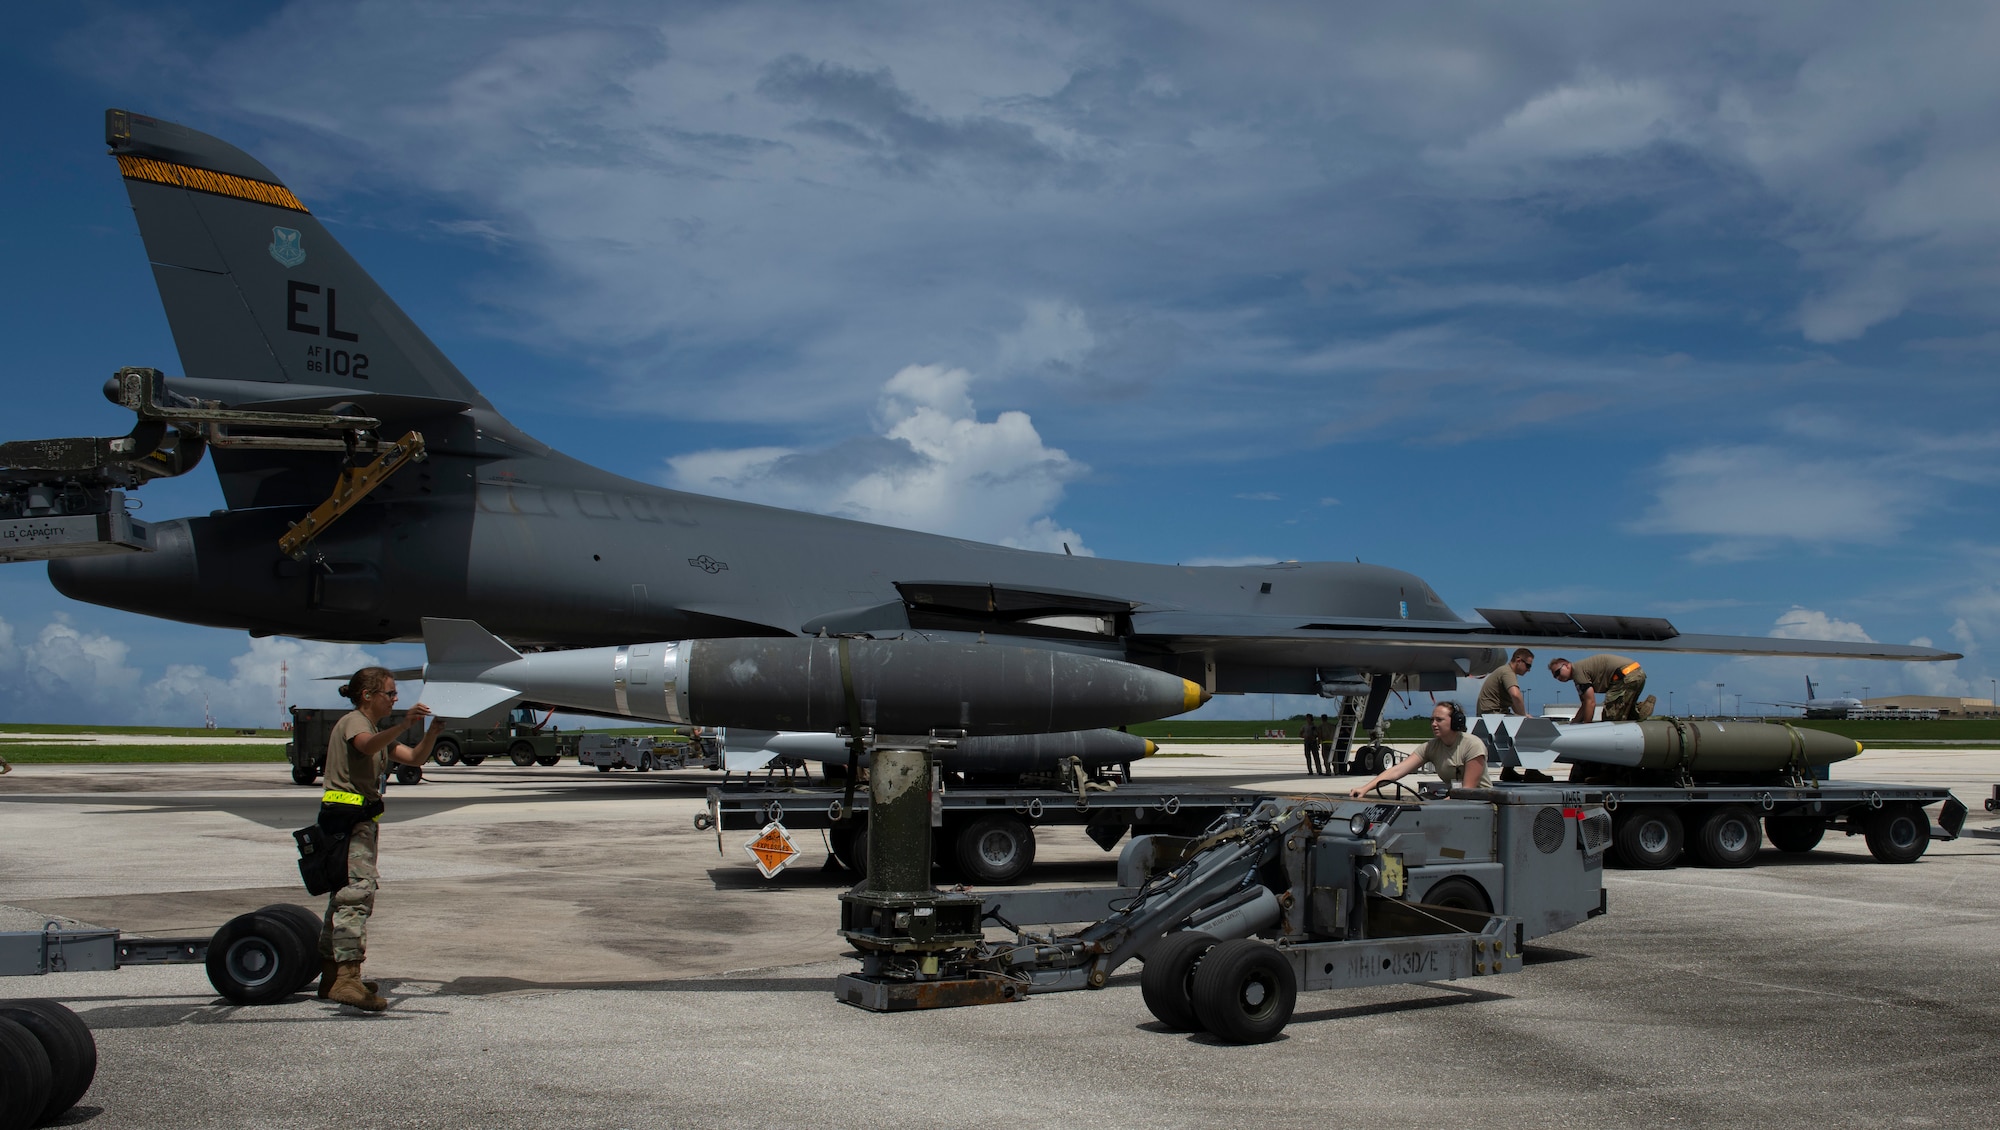 Load crew members, assigned to the 28th Aircraft Maintenance Squadron, 37th Aircraft Maintenance Unit use a munitions lift truck, to load a GBU-38 Joint Direct Attack Munition into a B-1B Lancer, ahead of a 16-hour Bomber Task Force mission to Australia from Andersen Air Force Base, Guam, Aug. 5, 2020. Bomber Task Force maintainers ensure the bombers, equipment, and munitions are ready – anytime, anywhere. (U.S. Air Force photo by Airman 1st Class Christina Bennett)